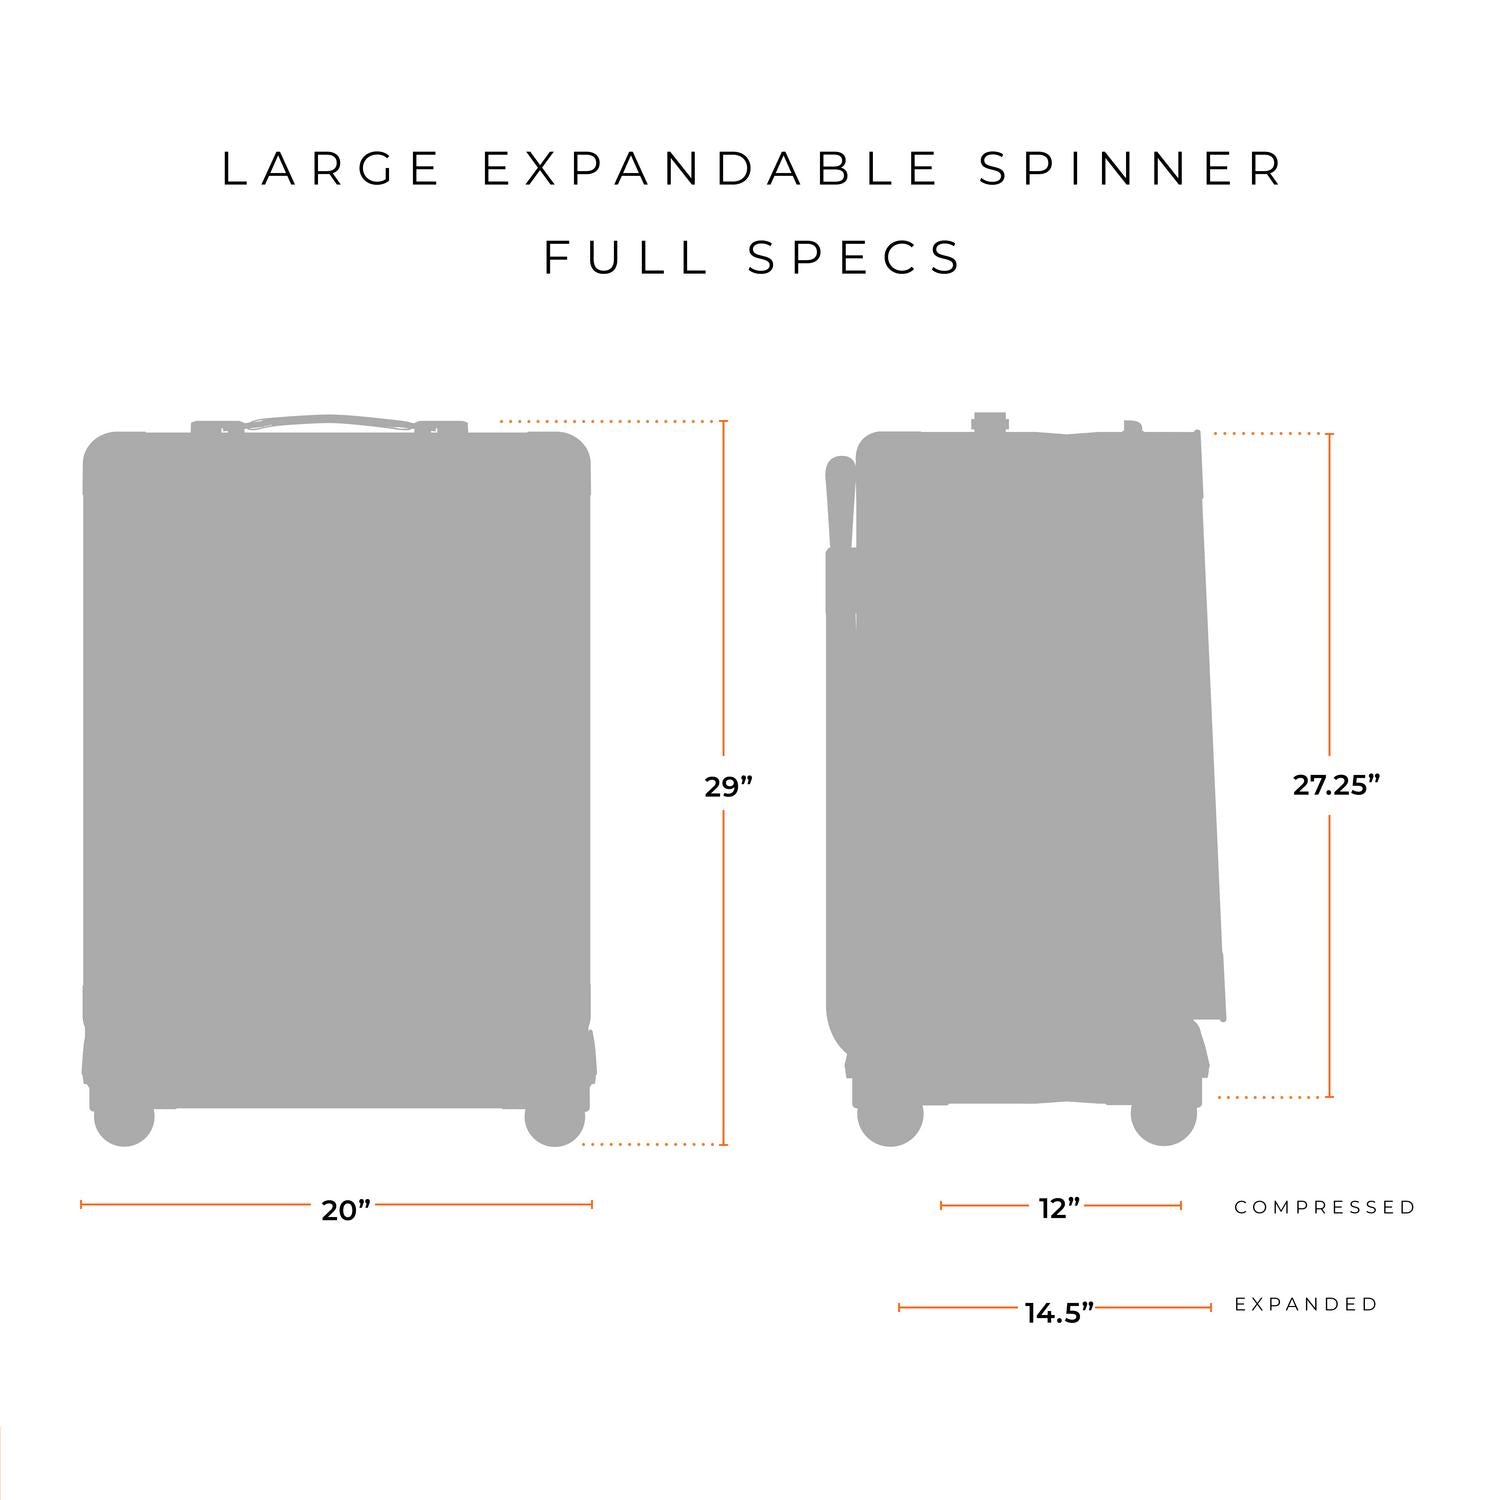 Briggs and Riley Large Expandable Spinner Full Specs 20"x29"12" compressed or 14.5" expanded #color_black